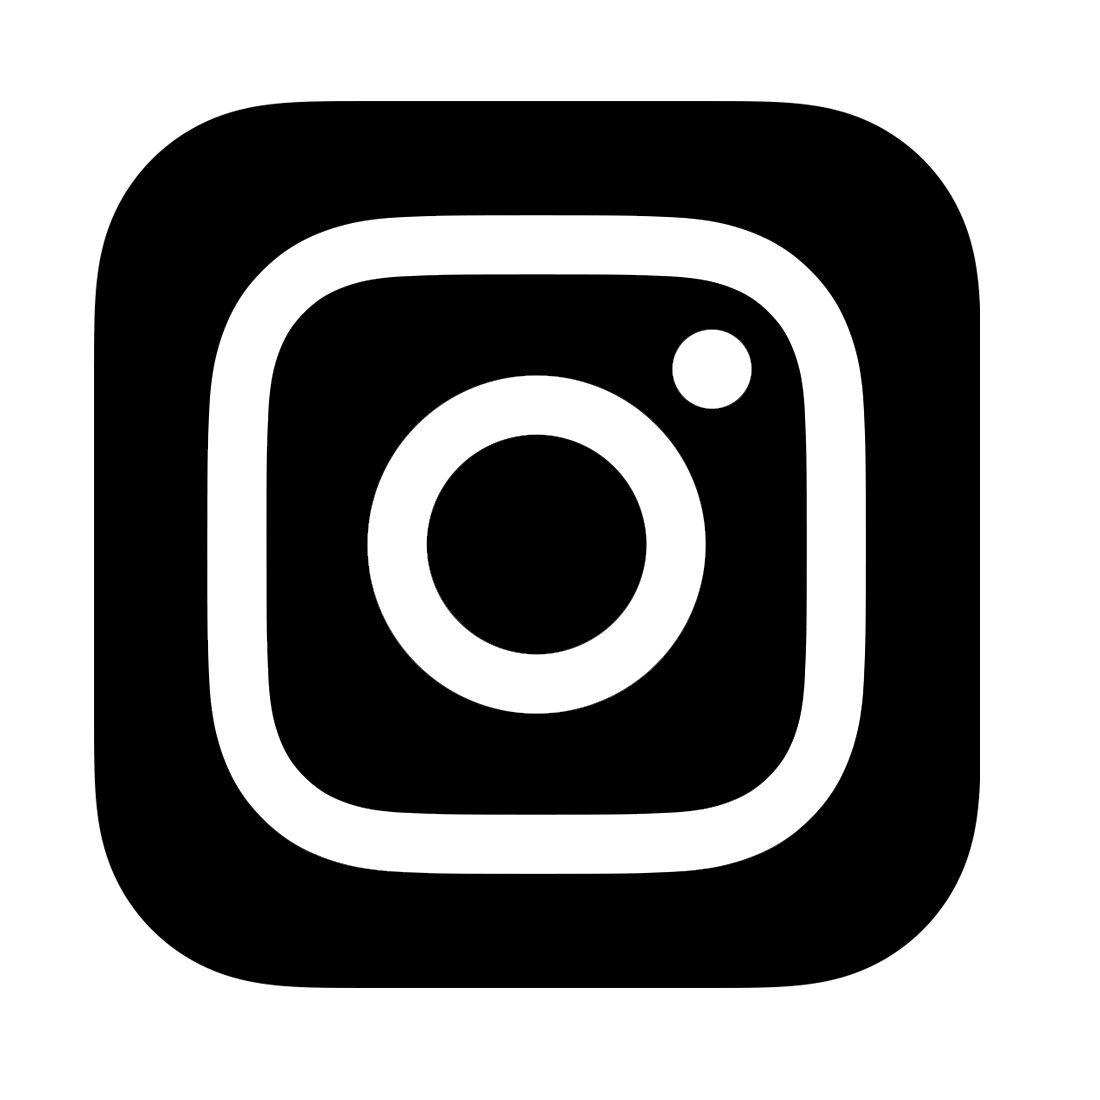 Fake Instagram Logo - Instagram Steps-Up its Crackdown on Fake Accounts, Likes, Follows ...